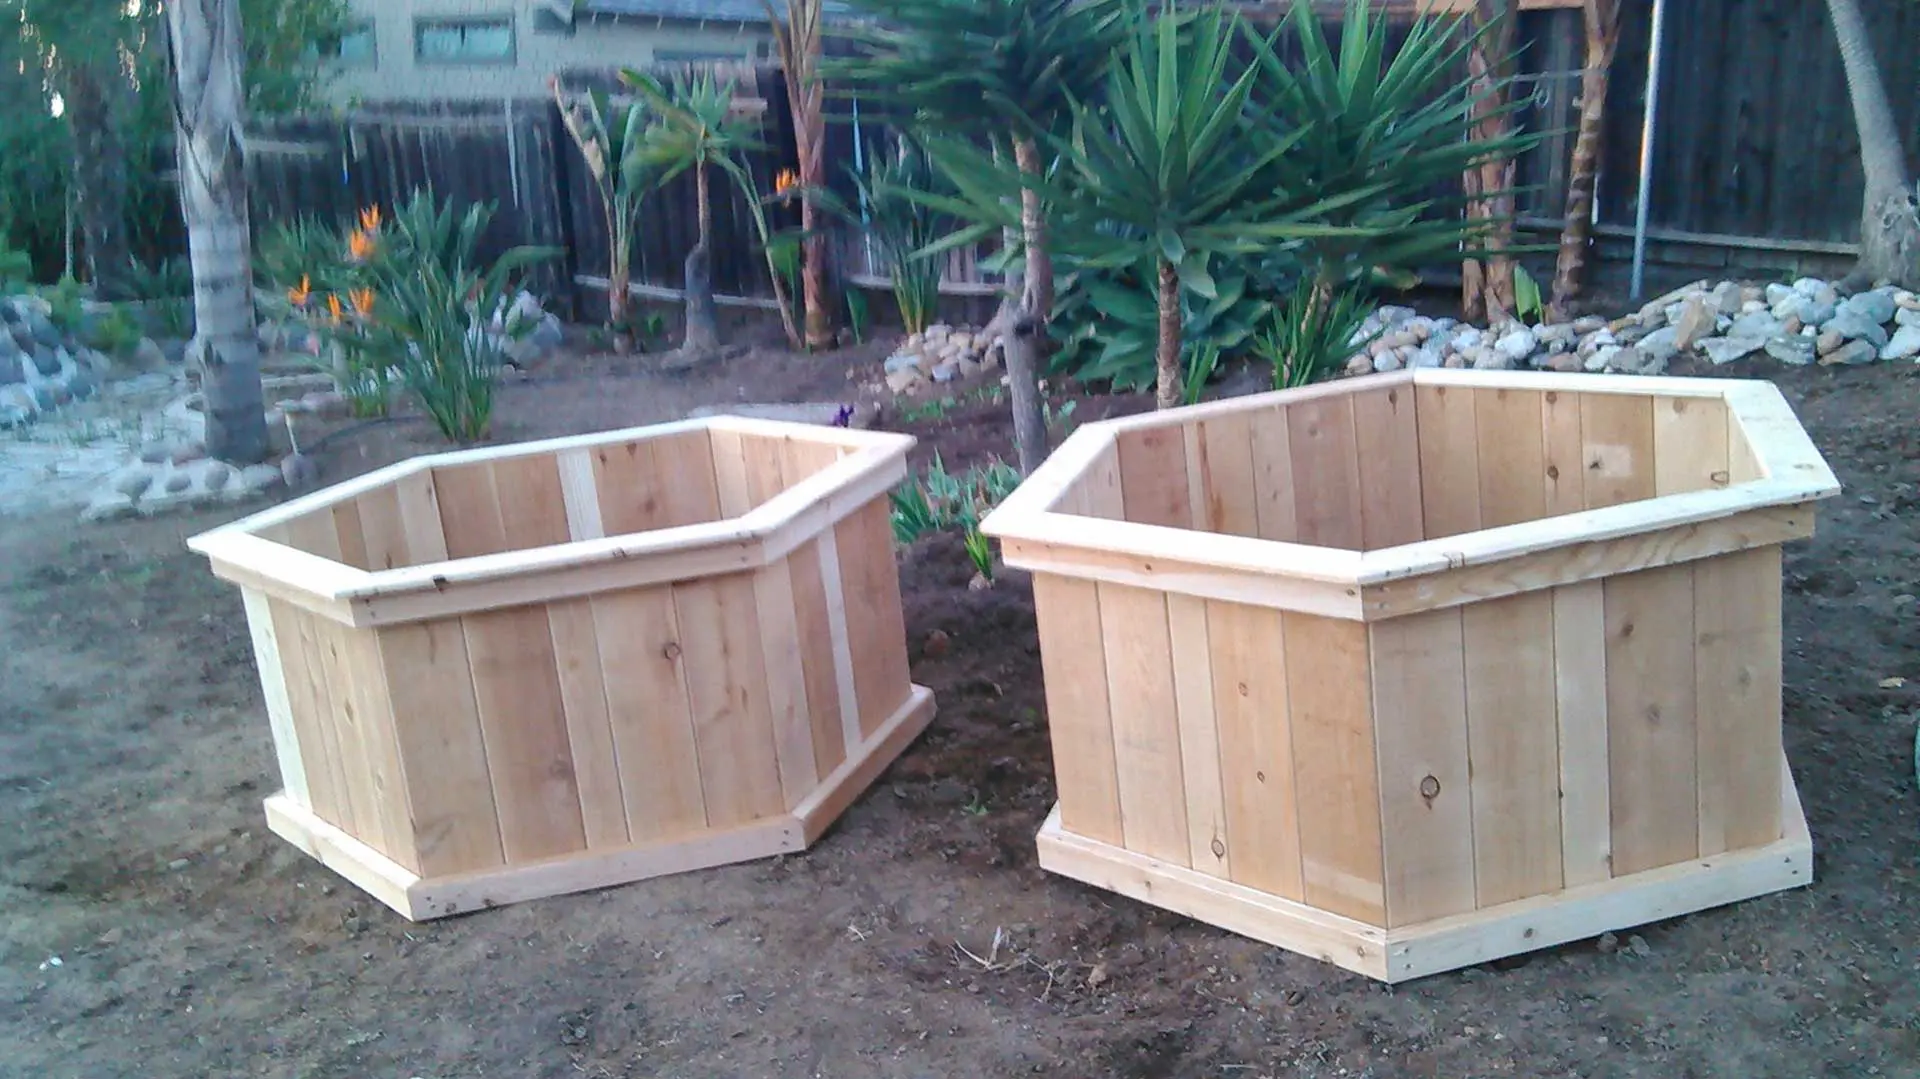 Two wooden planters on the ground.